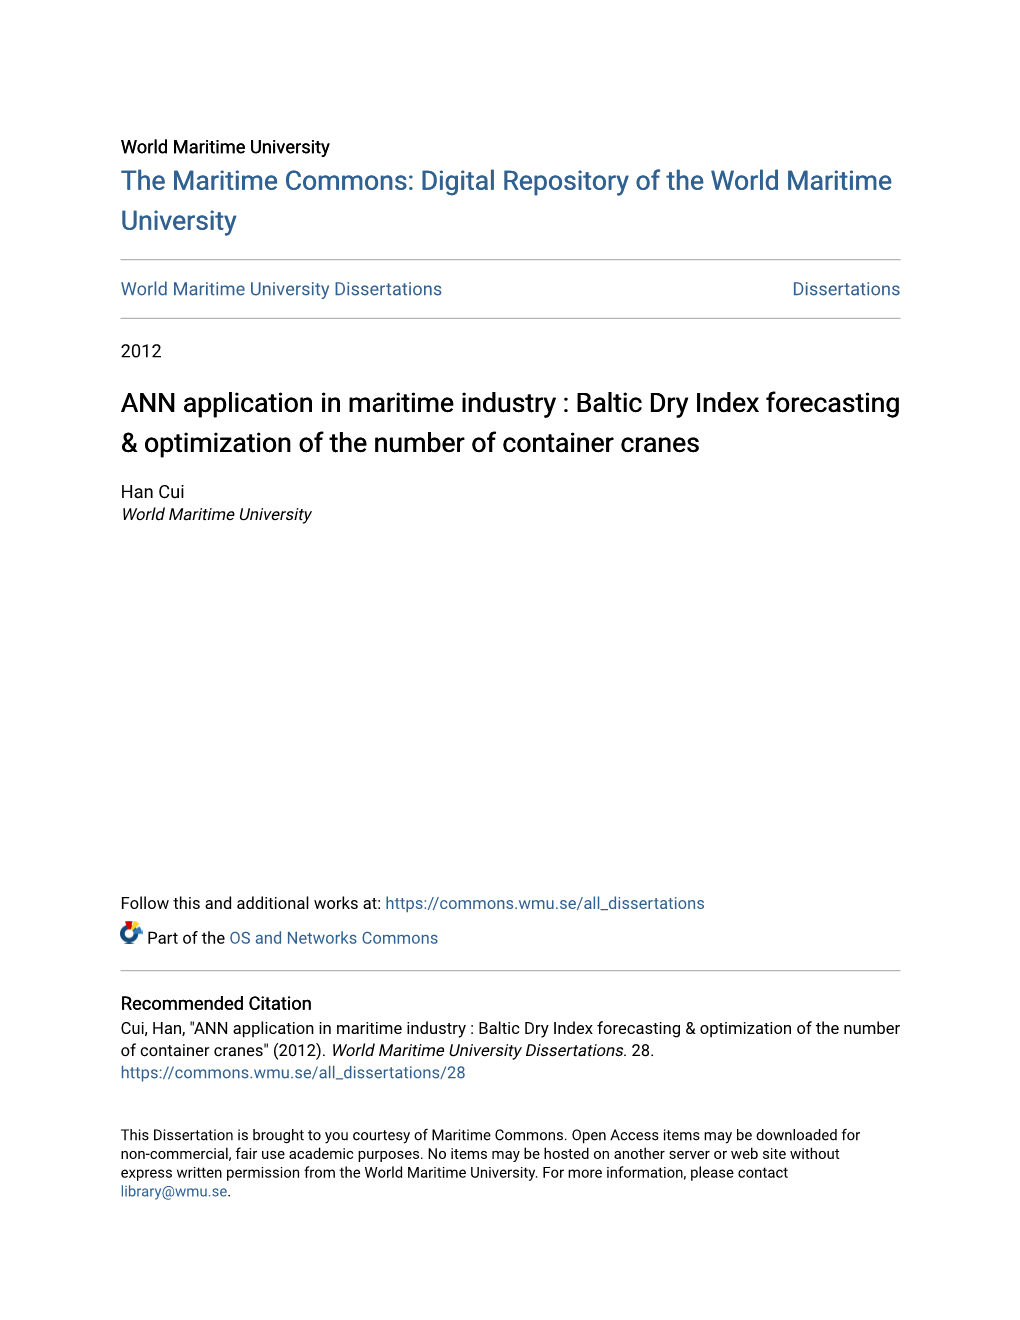 ANN Application in Maritime Industry : Baltic Dry Index Forecasting & Optimization of the Number of Container Cranes